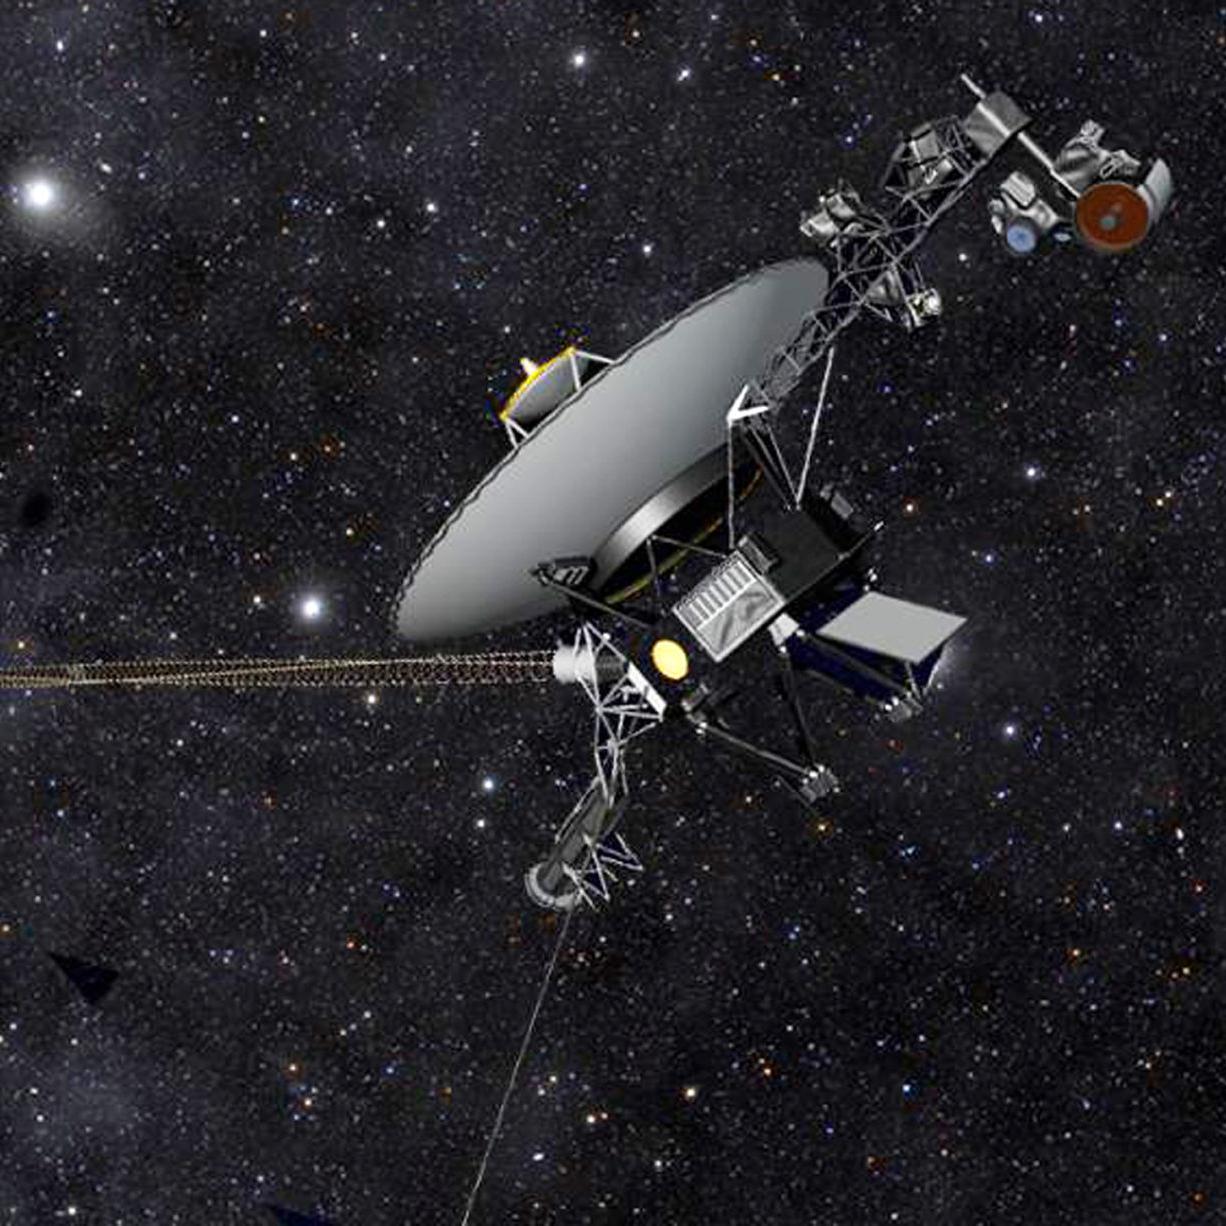 Goodbye Voyager 1: the probe has left the solar system | News | bakersfield.com